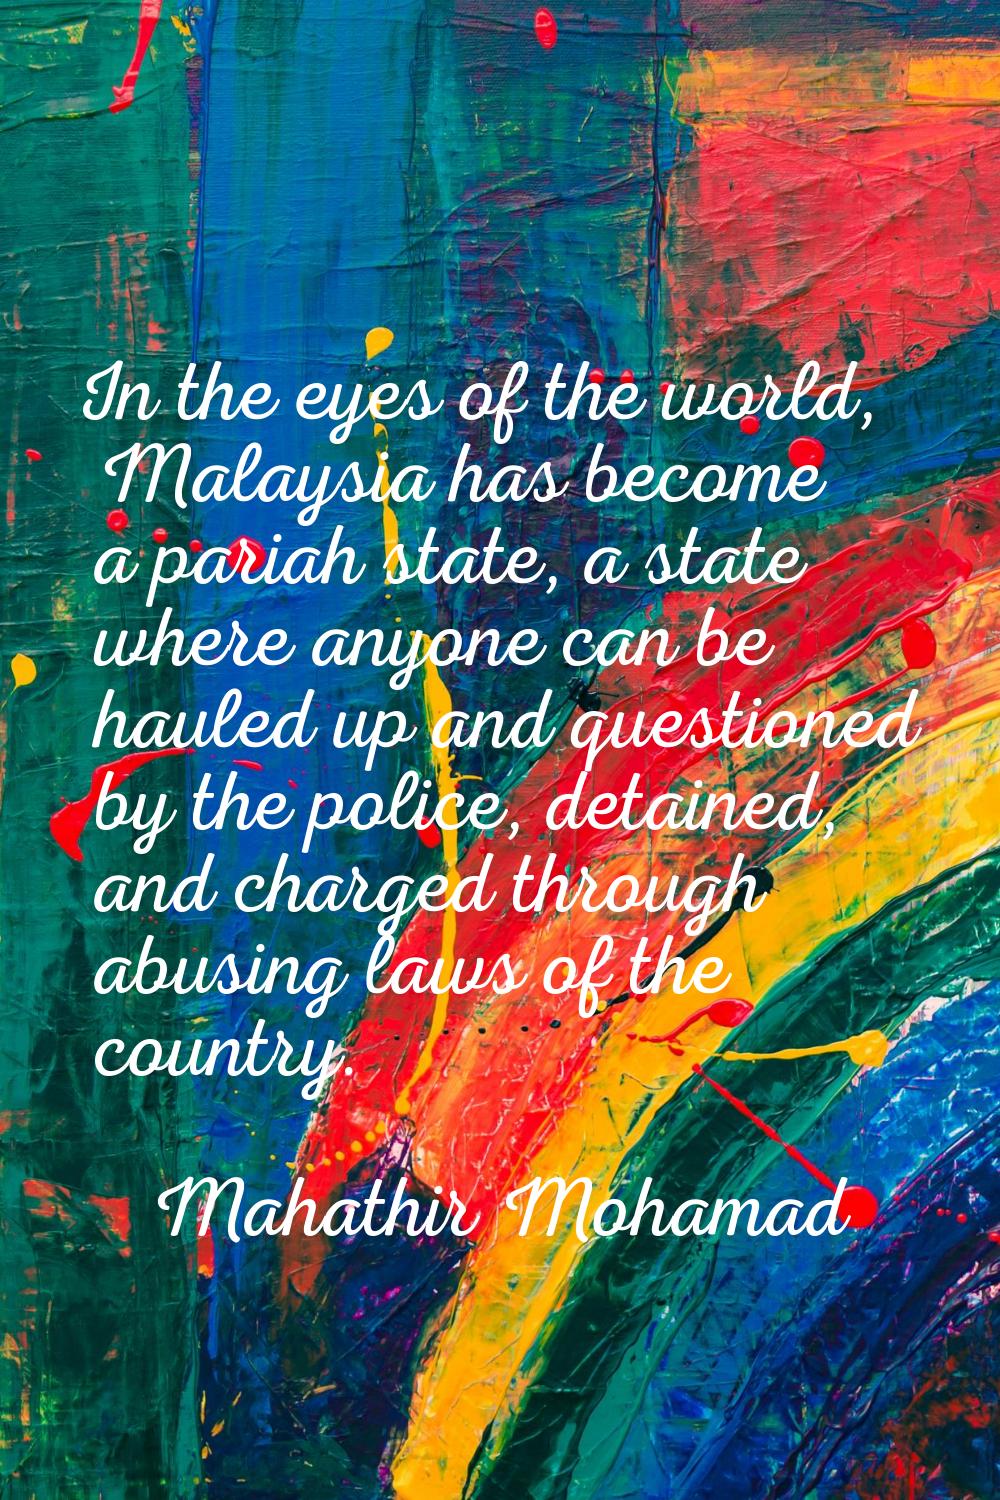 In the eyes of the world, Malaysia has become a pariah state, a state where anyone can be hauled up